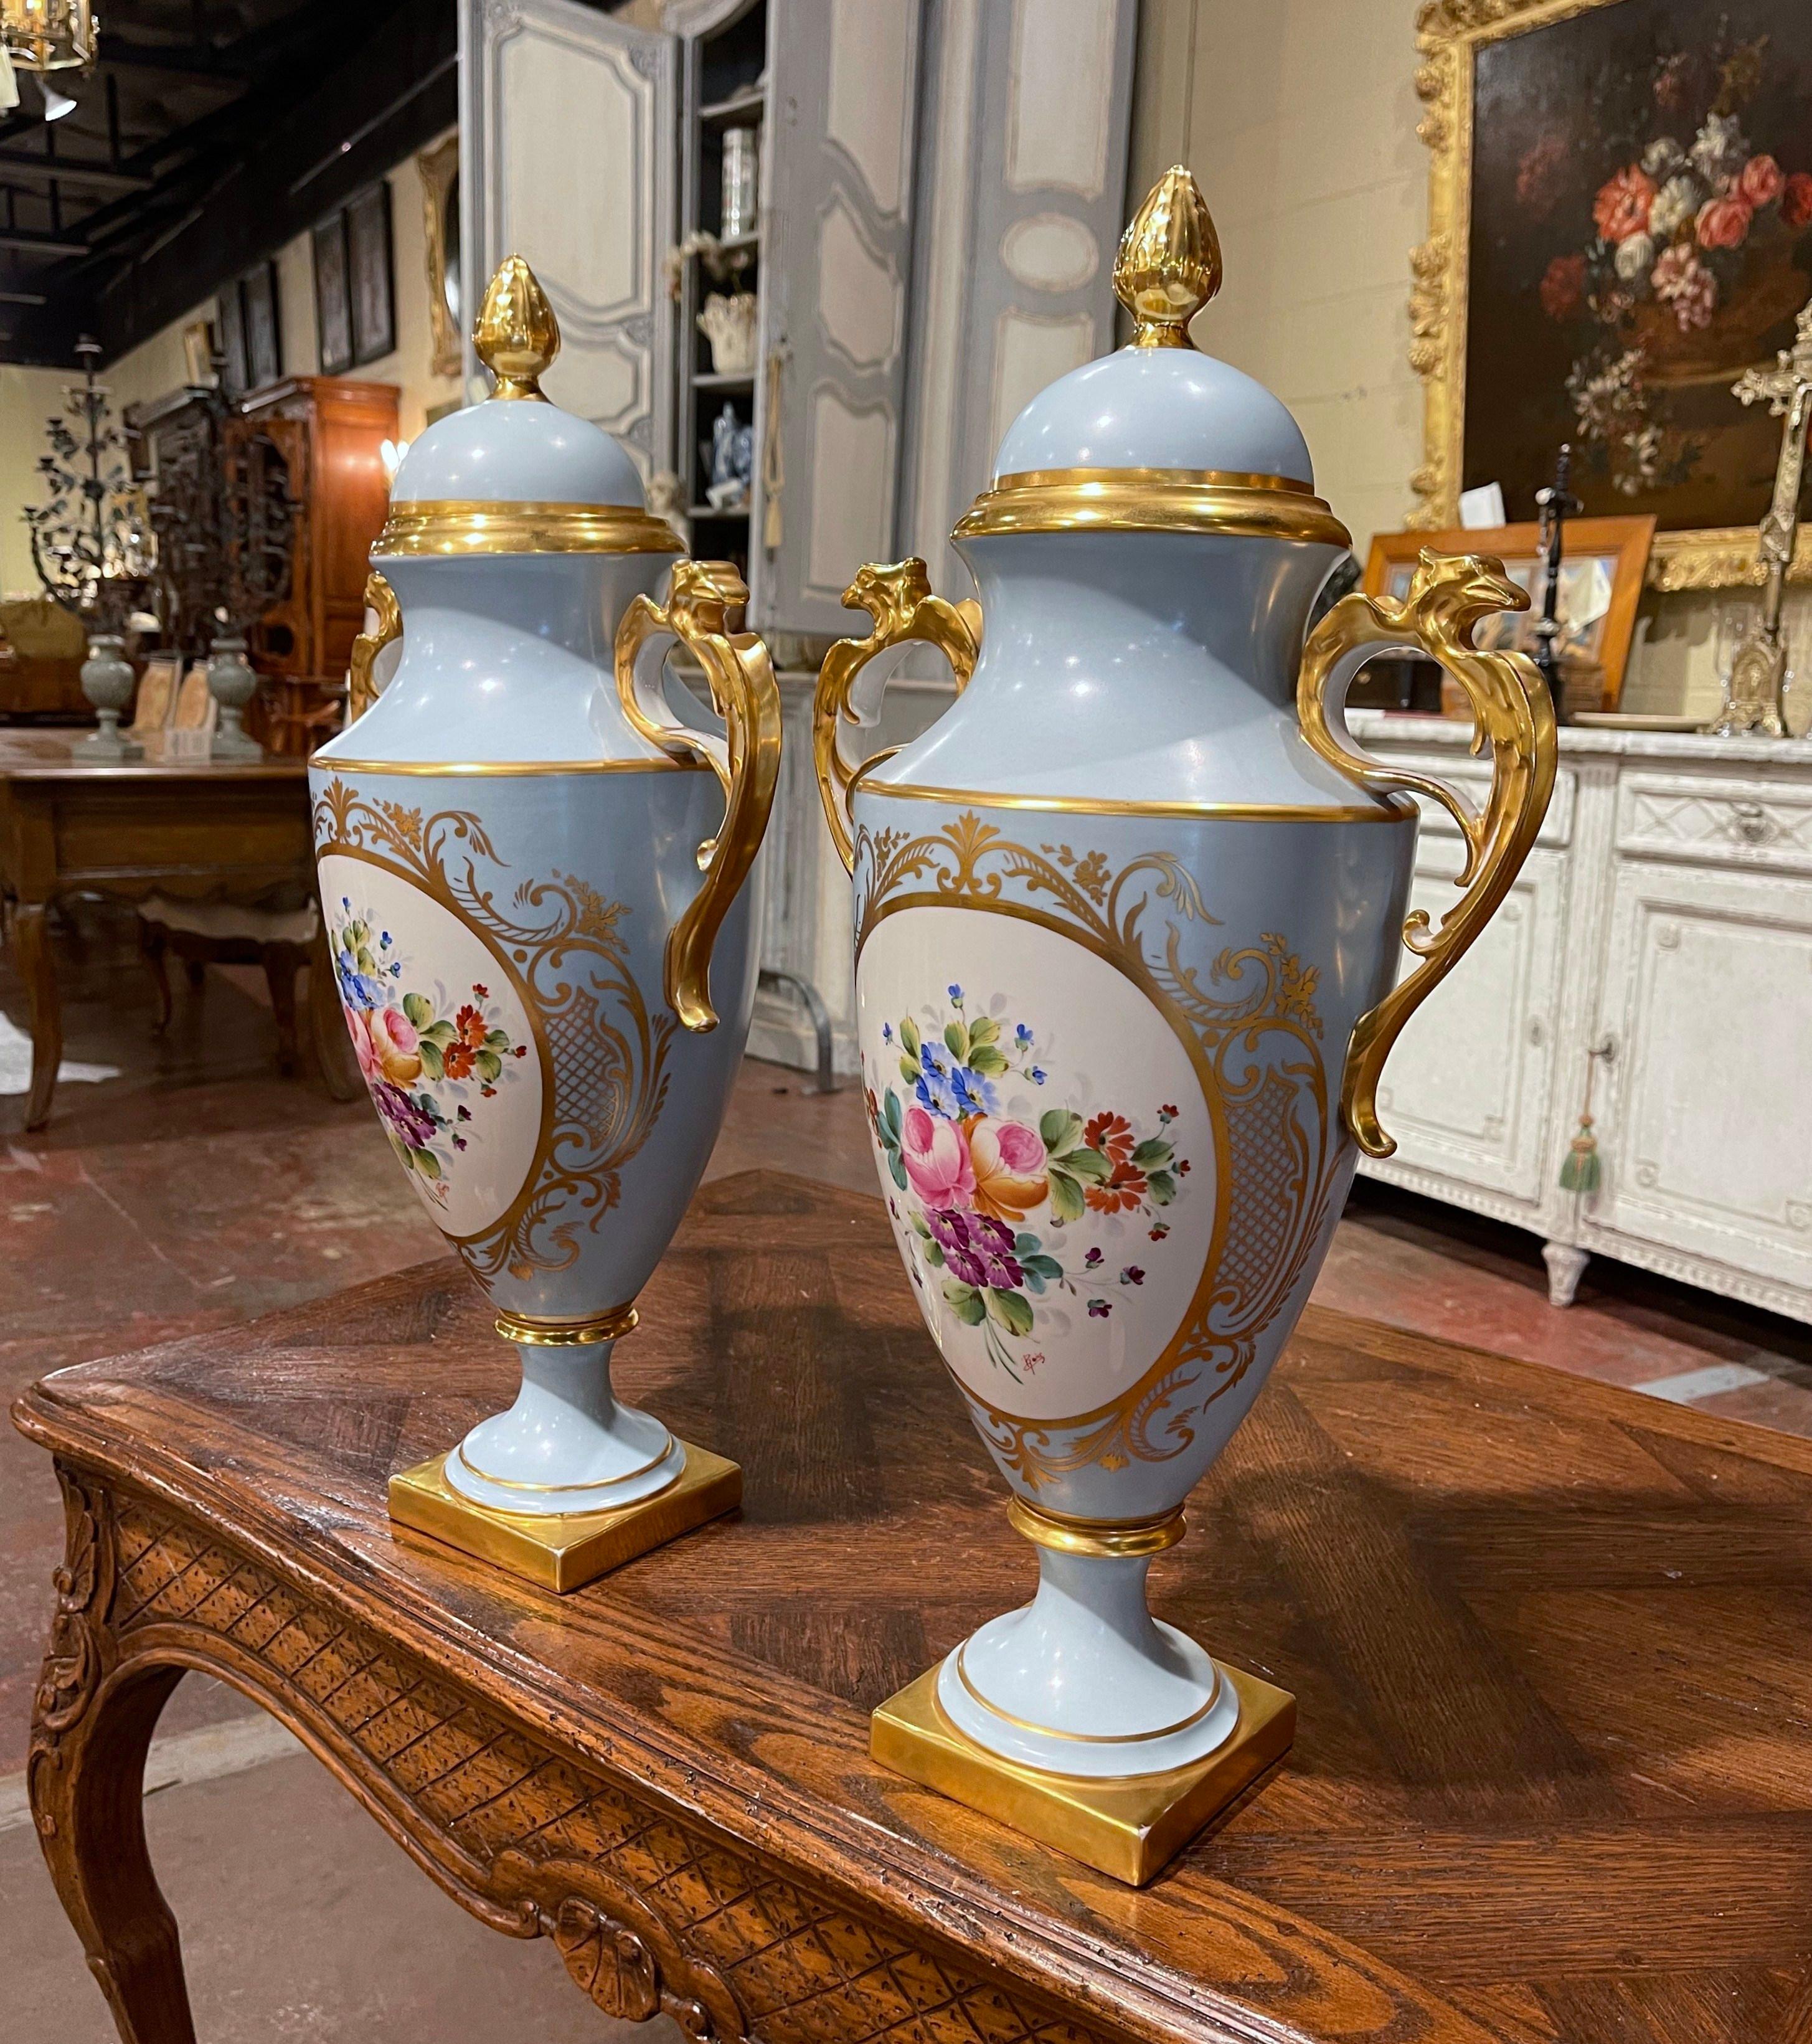 Bring a little color into your home with this pair of elegant, antique porcelain vessels. Crafted circa 1950, each vase is dressed with a dome lid and intricate side handles with bird figure. Both colorful urns are stamped on the bottom 